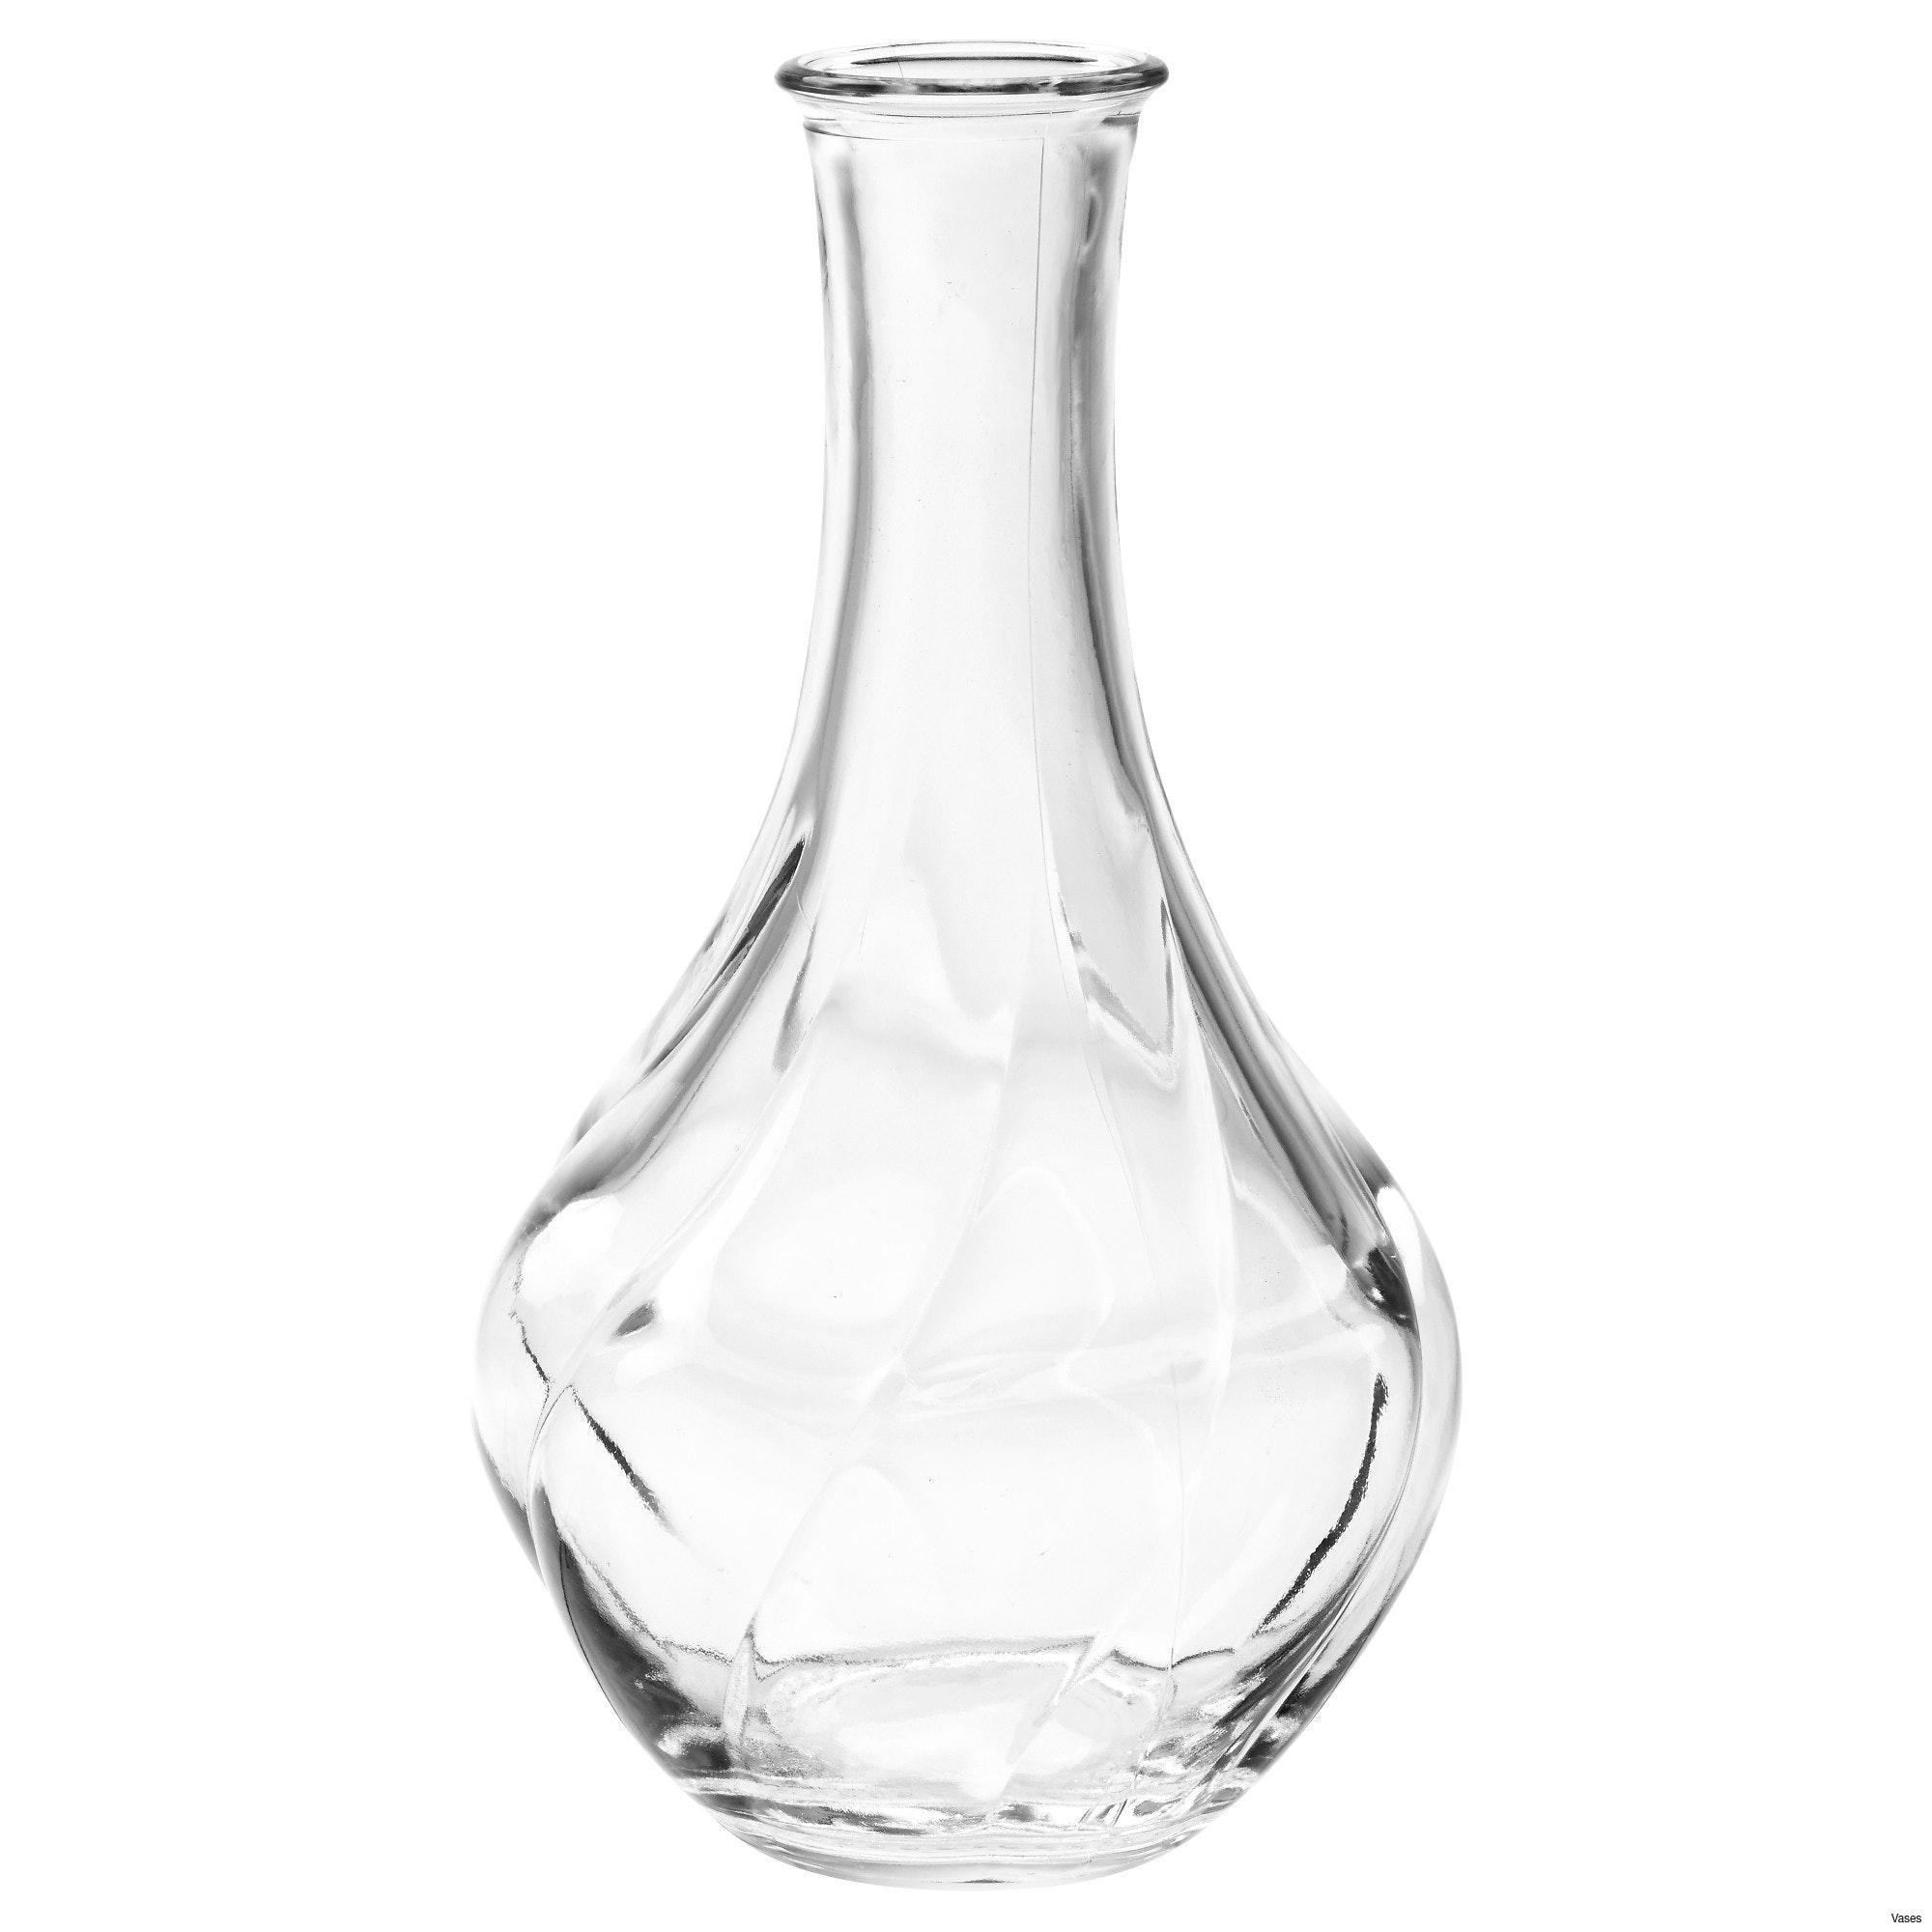 17 Lovely Cheap Large Vases 2024 free download cheap large vases of large glass vase gallery living room glass vases fresh clear vase 0d regarding large glass vase gallery living room glass vases fresh clear vase 0d tags amazing and of